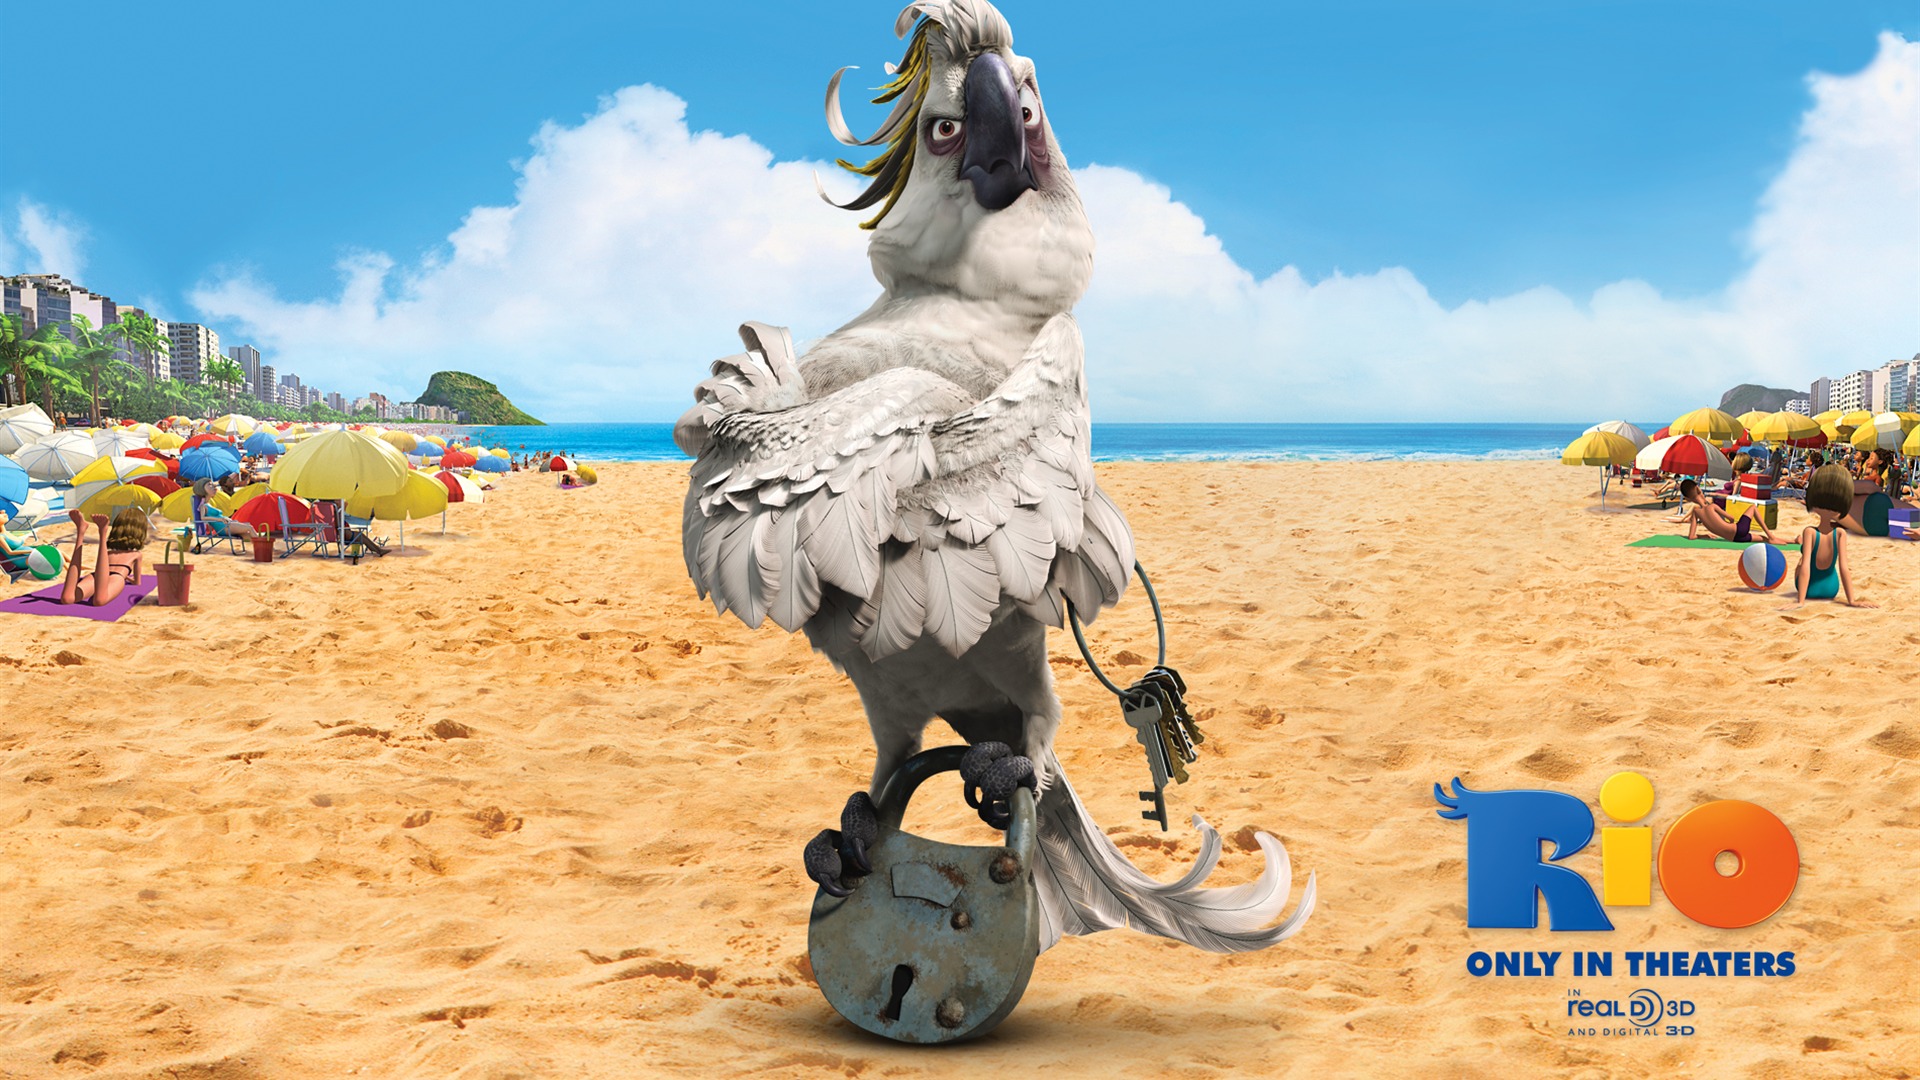 Rio 2011 wallpapers #11 - 1920x1080